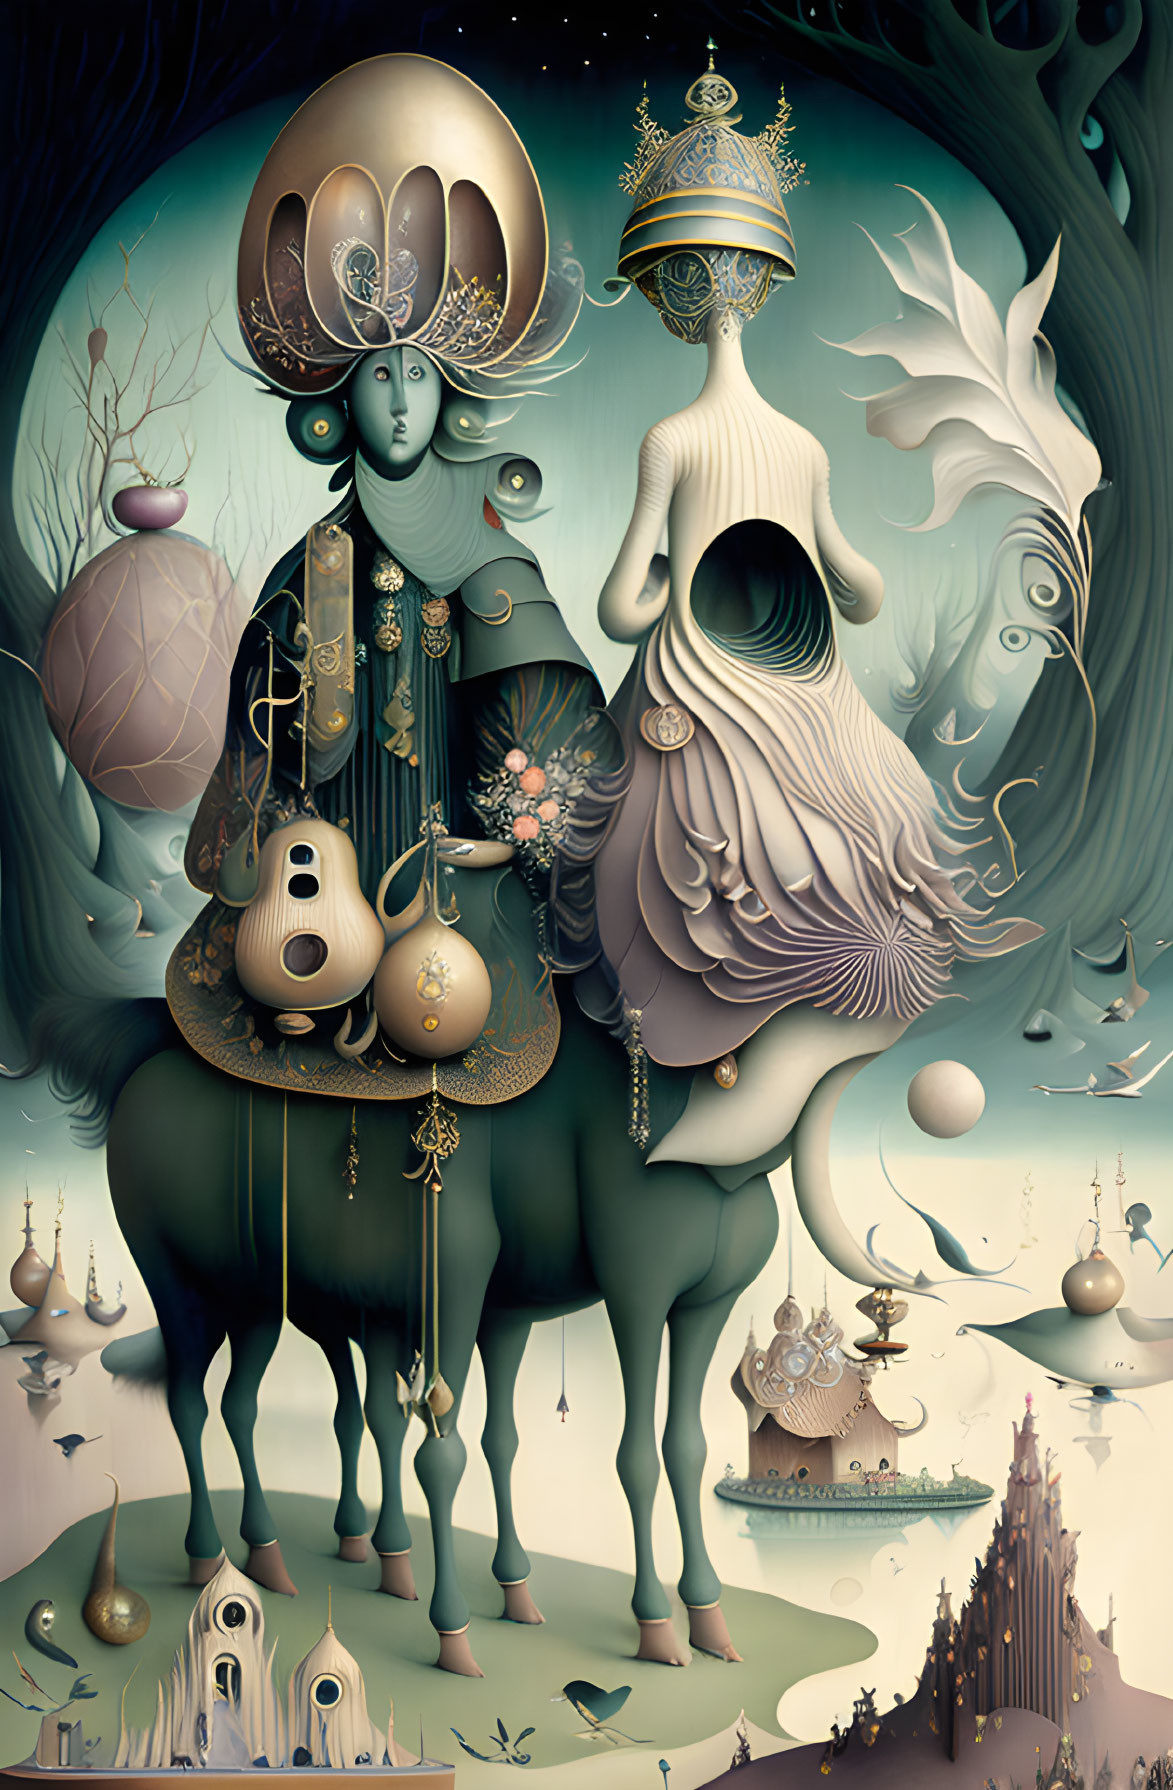 Ornate surreal artwork featuring nature, fantasy, and architecture elements